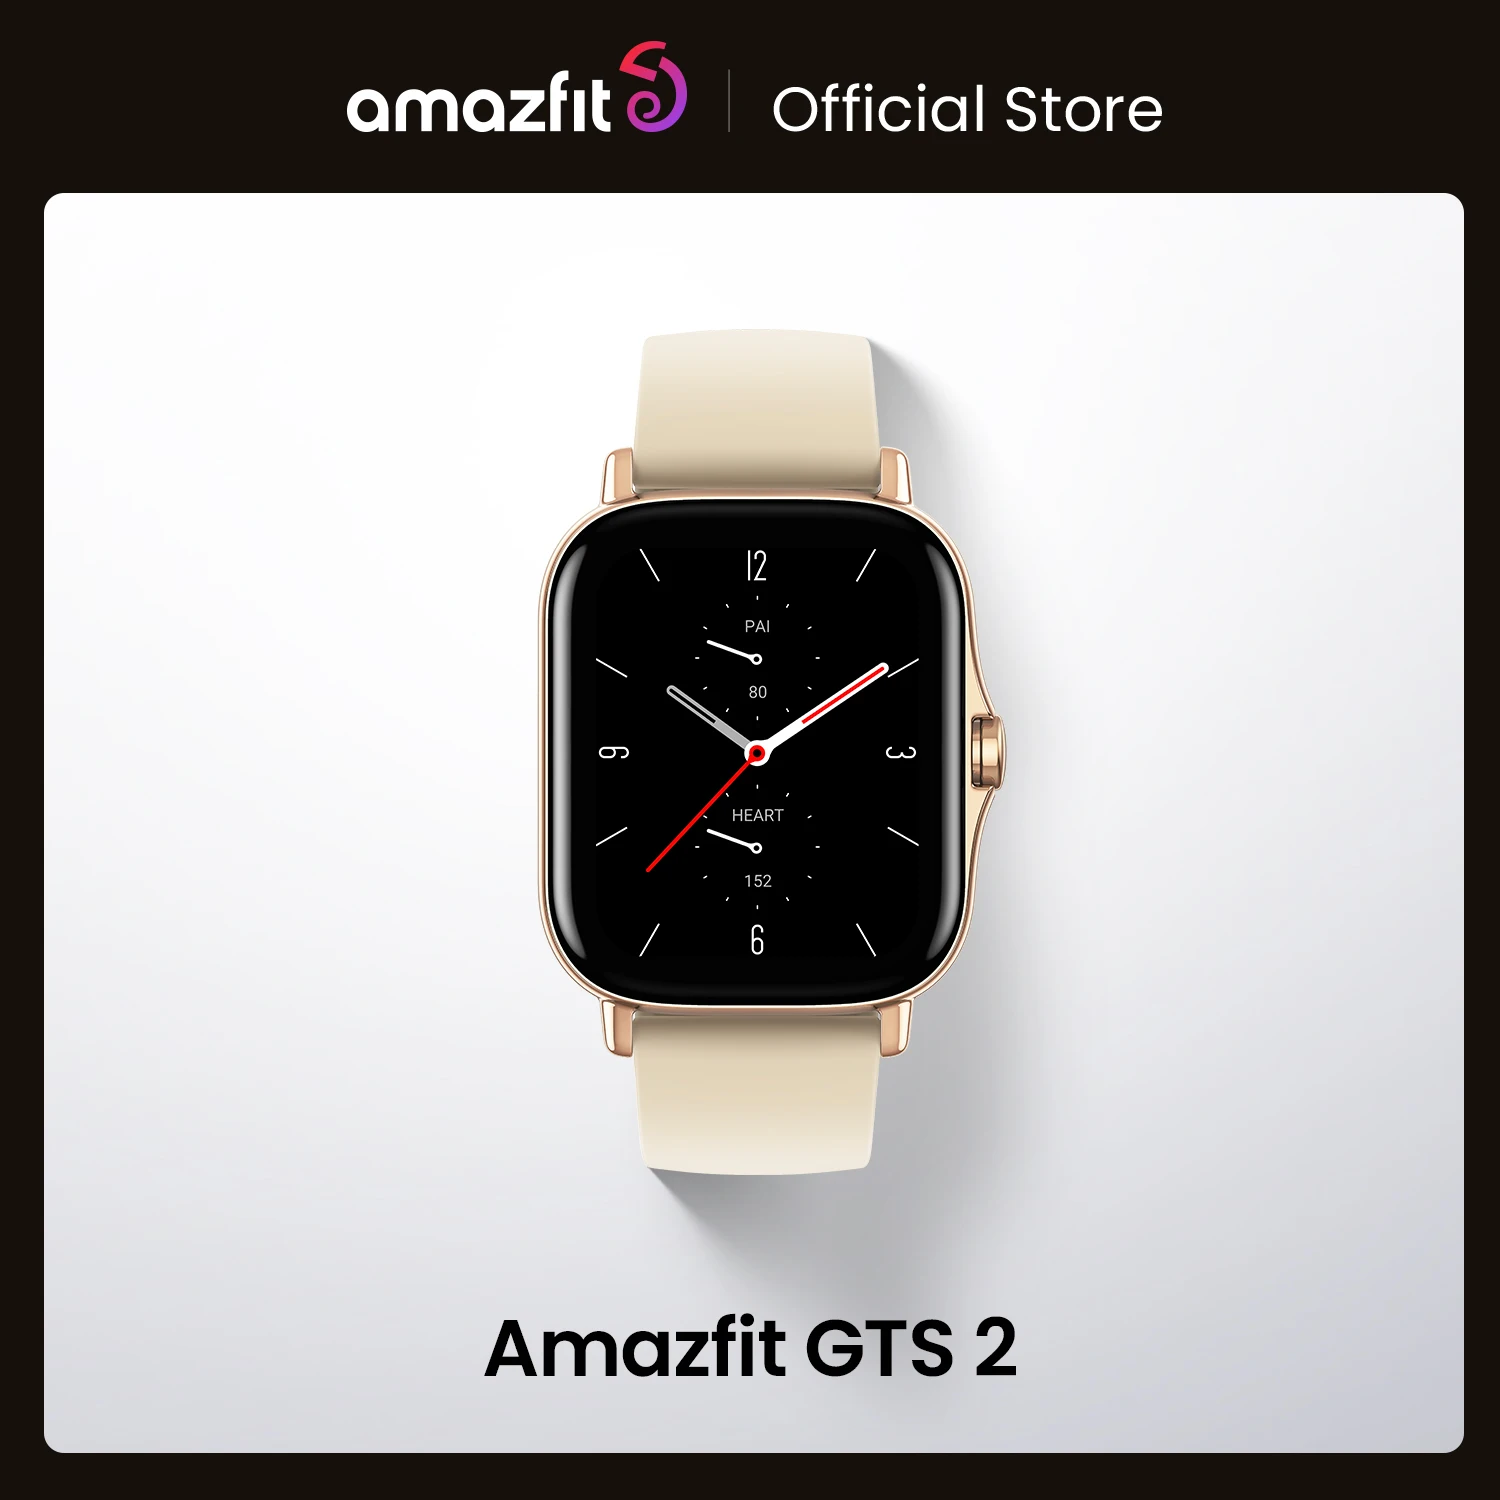 

Original Amazfit GTS 2 Smartwatch 12 Sport Modes 5ATM Water Resistant Alexa Built-in AMOLED Display All Day Tracking Smart Watch